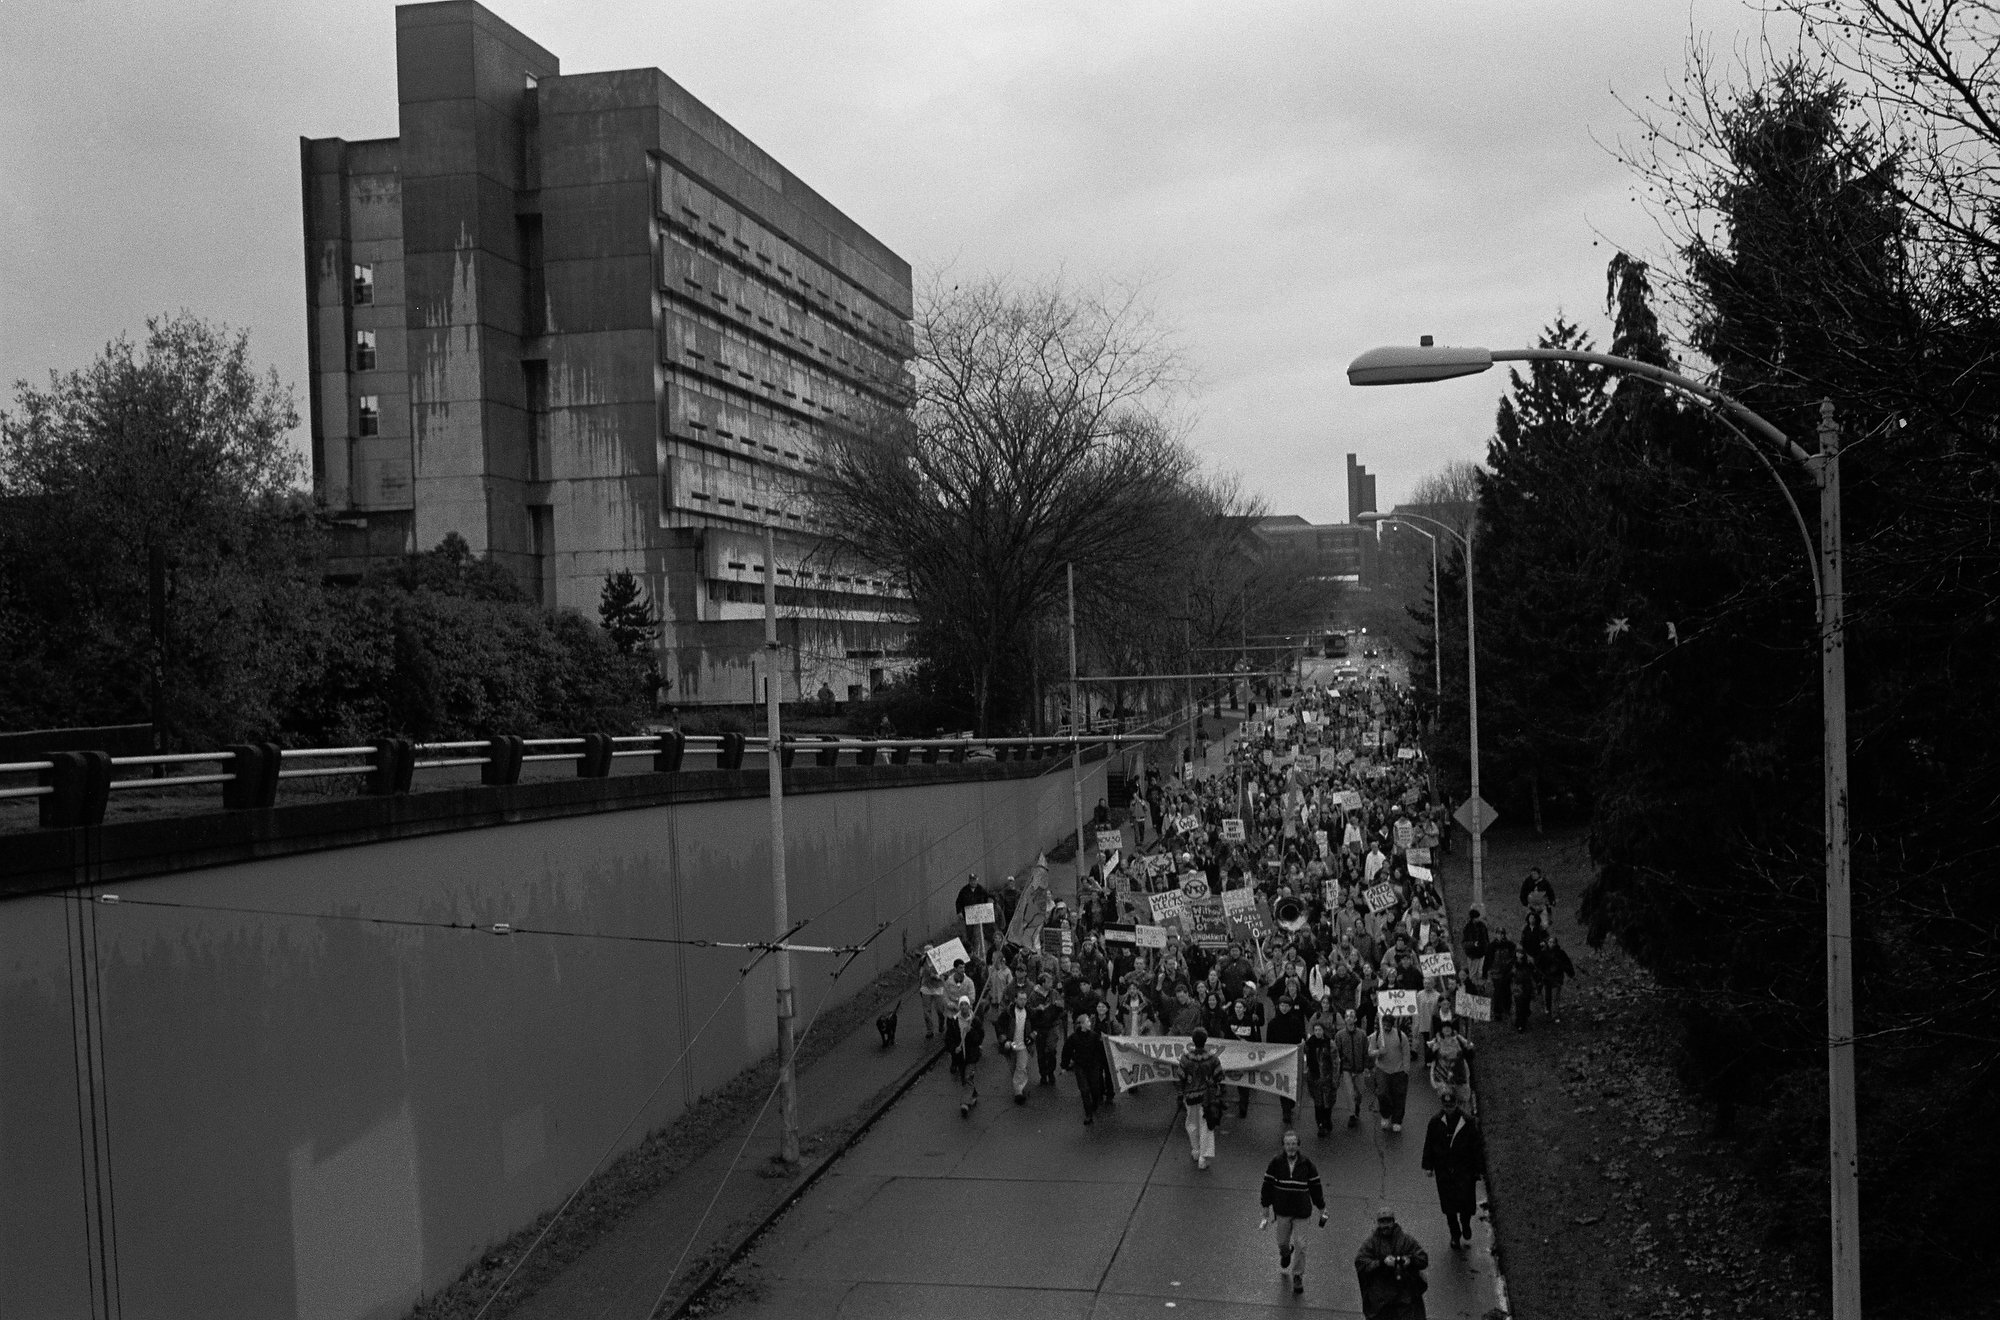  A University of Washington march during the World Trade Organization meeting moves towards downtown from the University District in Seattle, Washington, USA in 1999. 